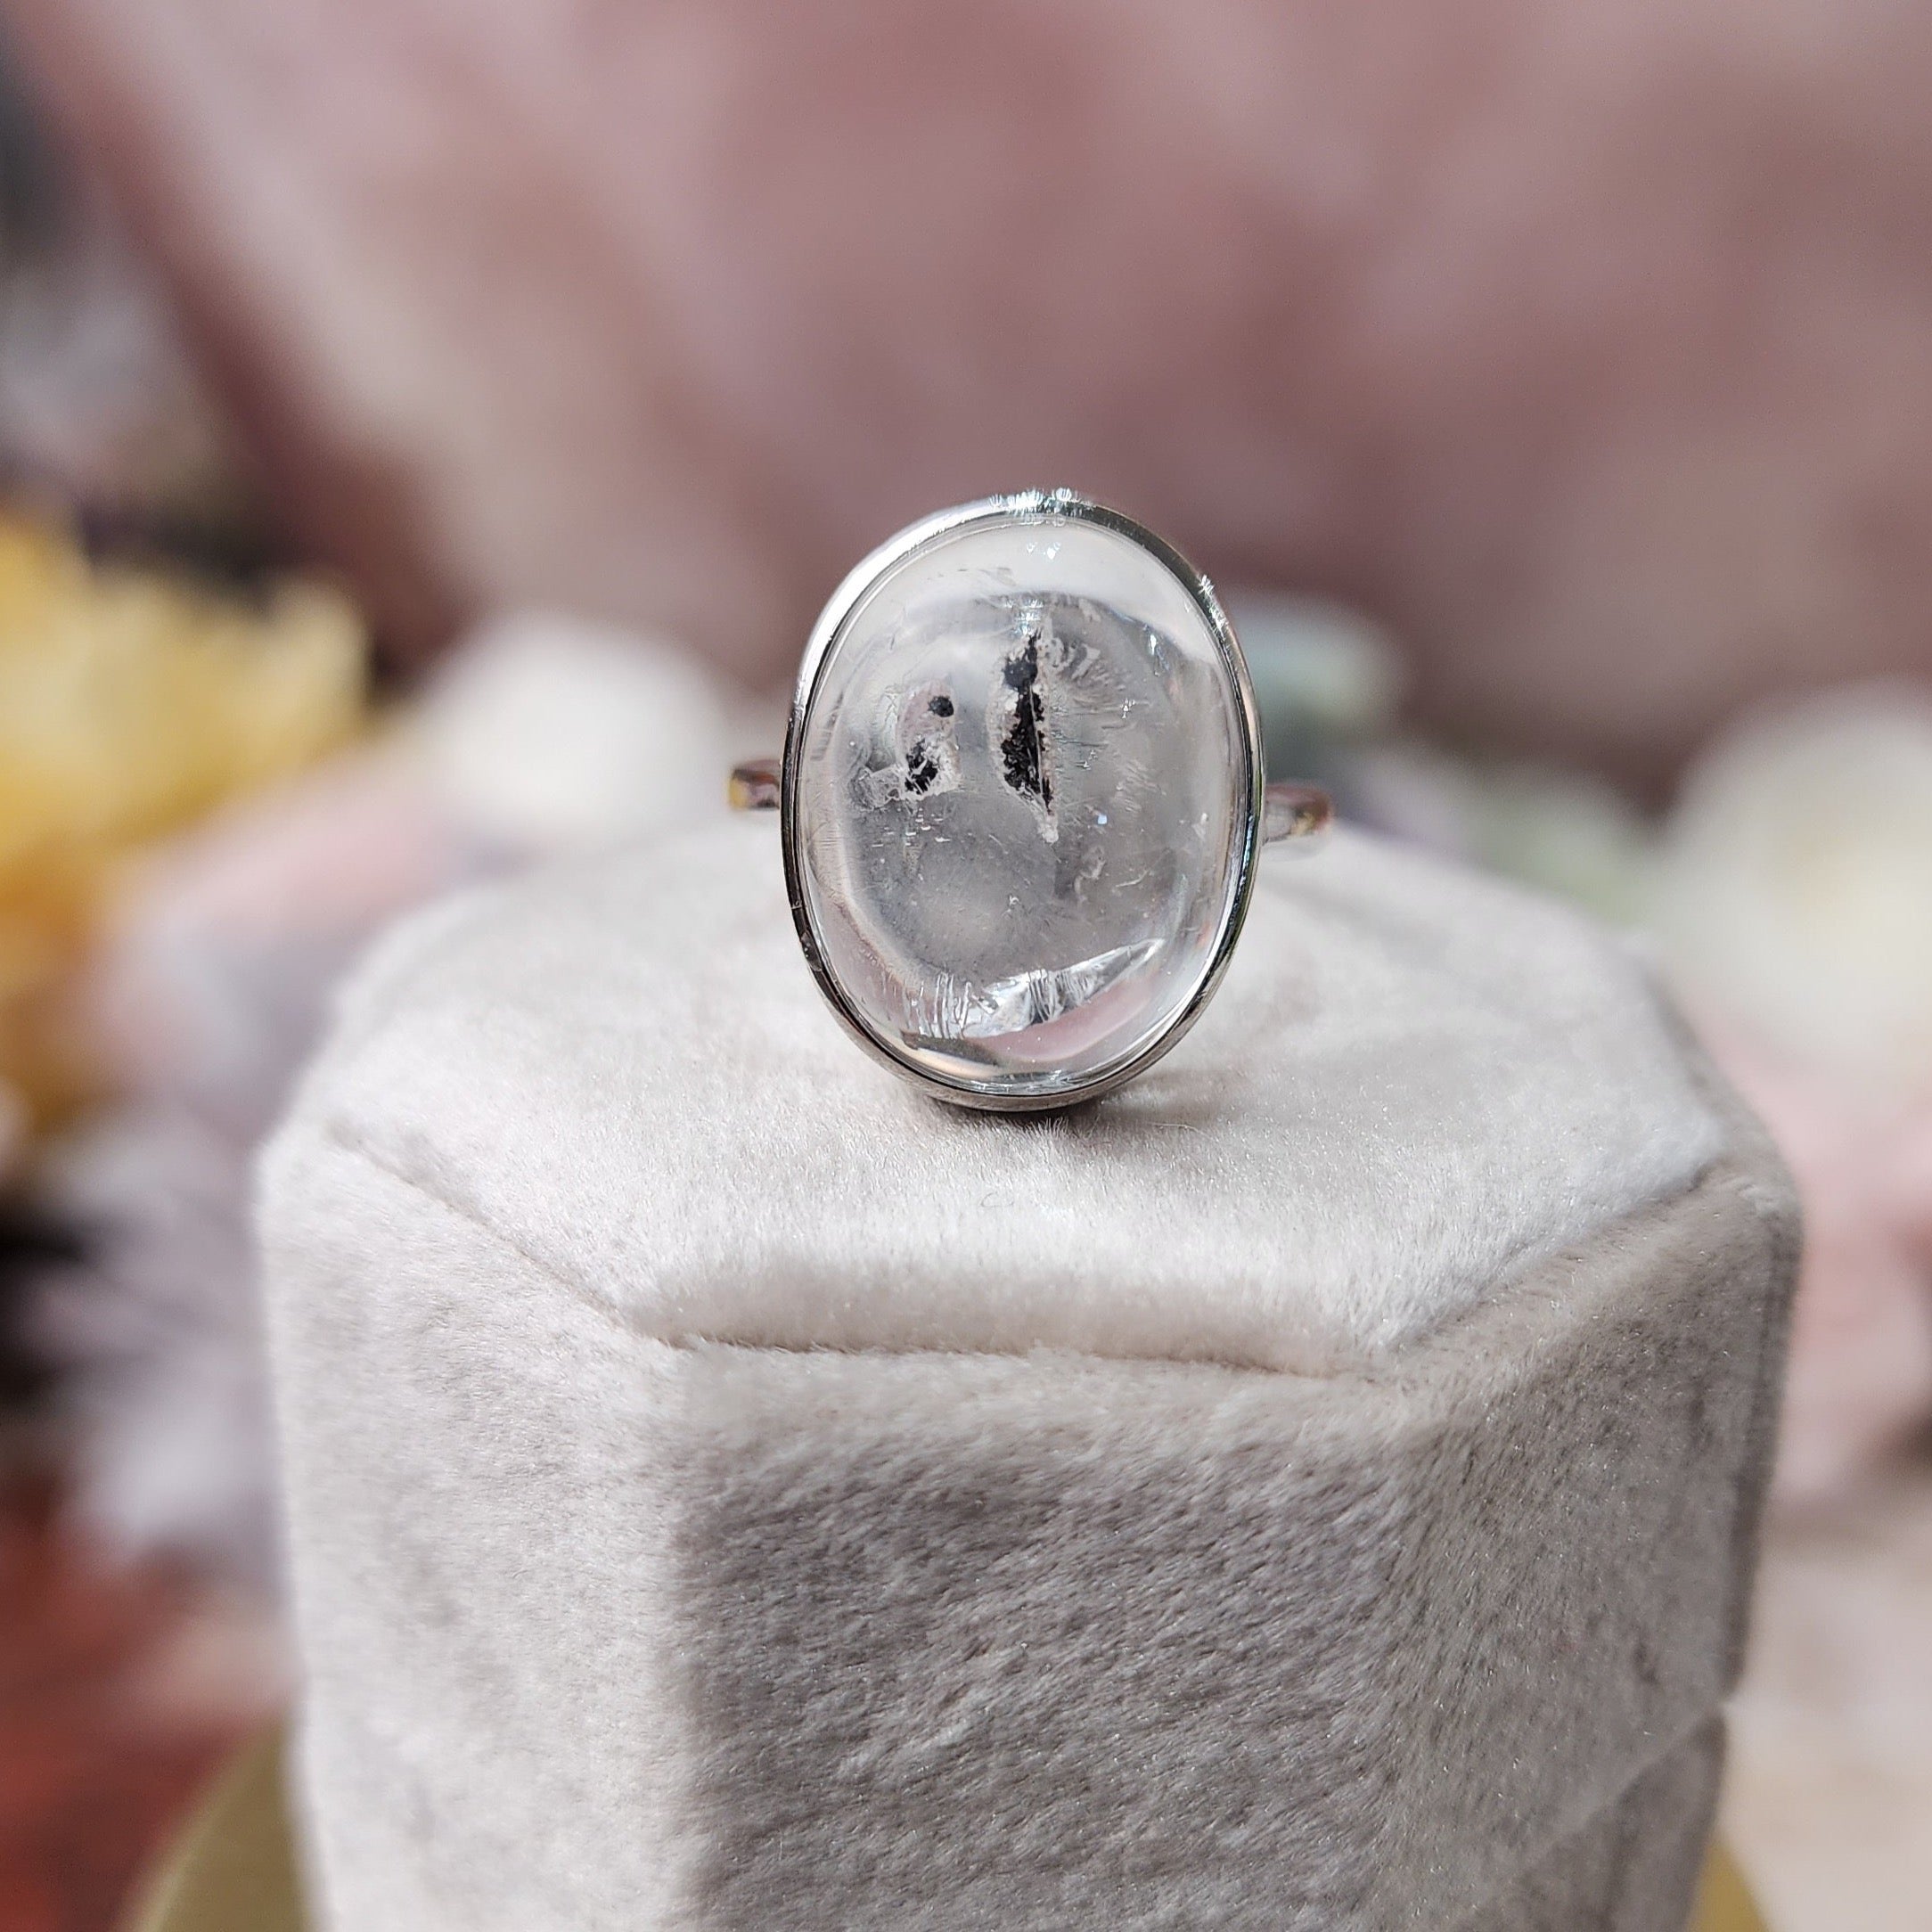 Enhydro Quartz Adjustable Ring .925 Silver for Powerful Healing and Balance